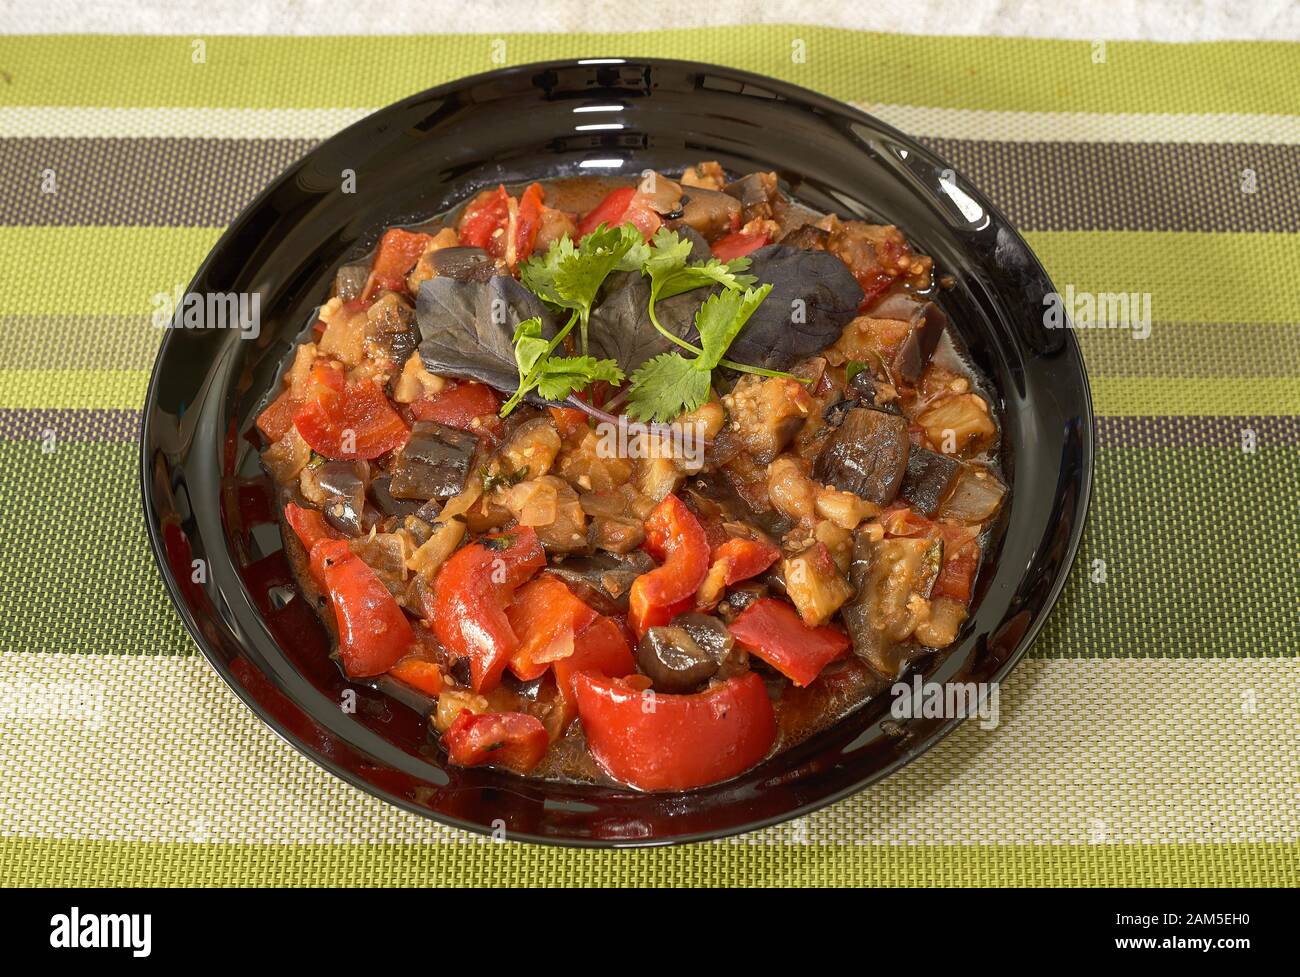 Red pepper with eggplant in its own sauce and parsley leaf on top. Stock Photo